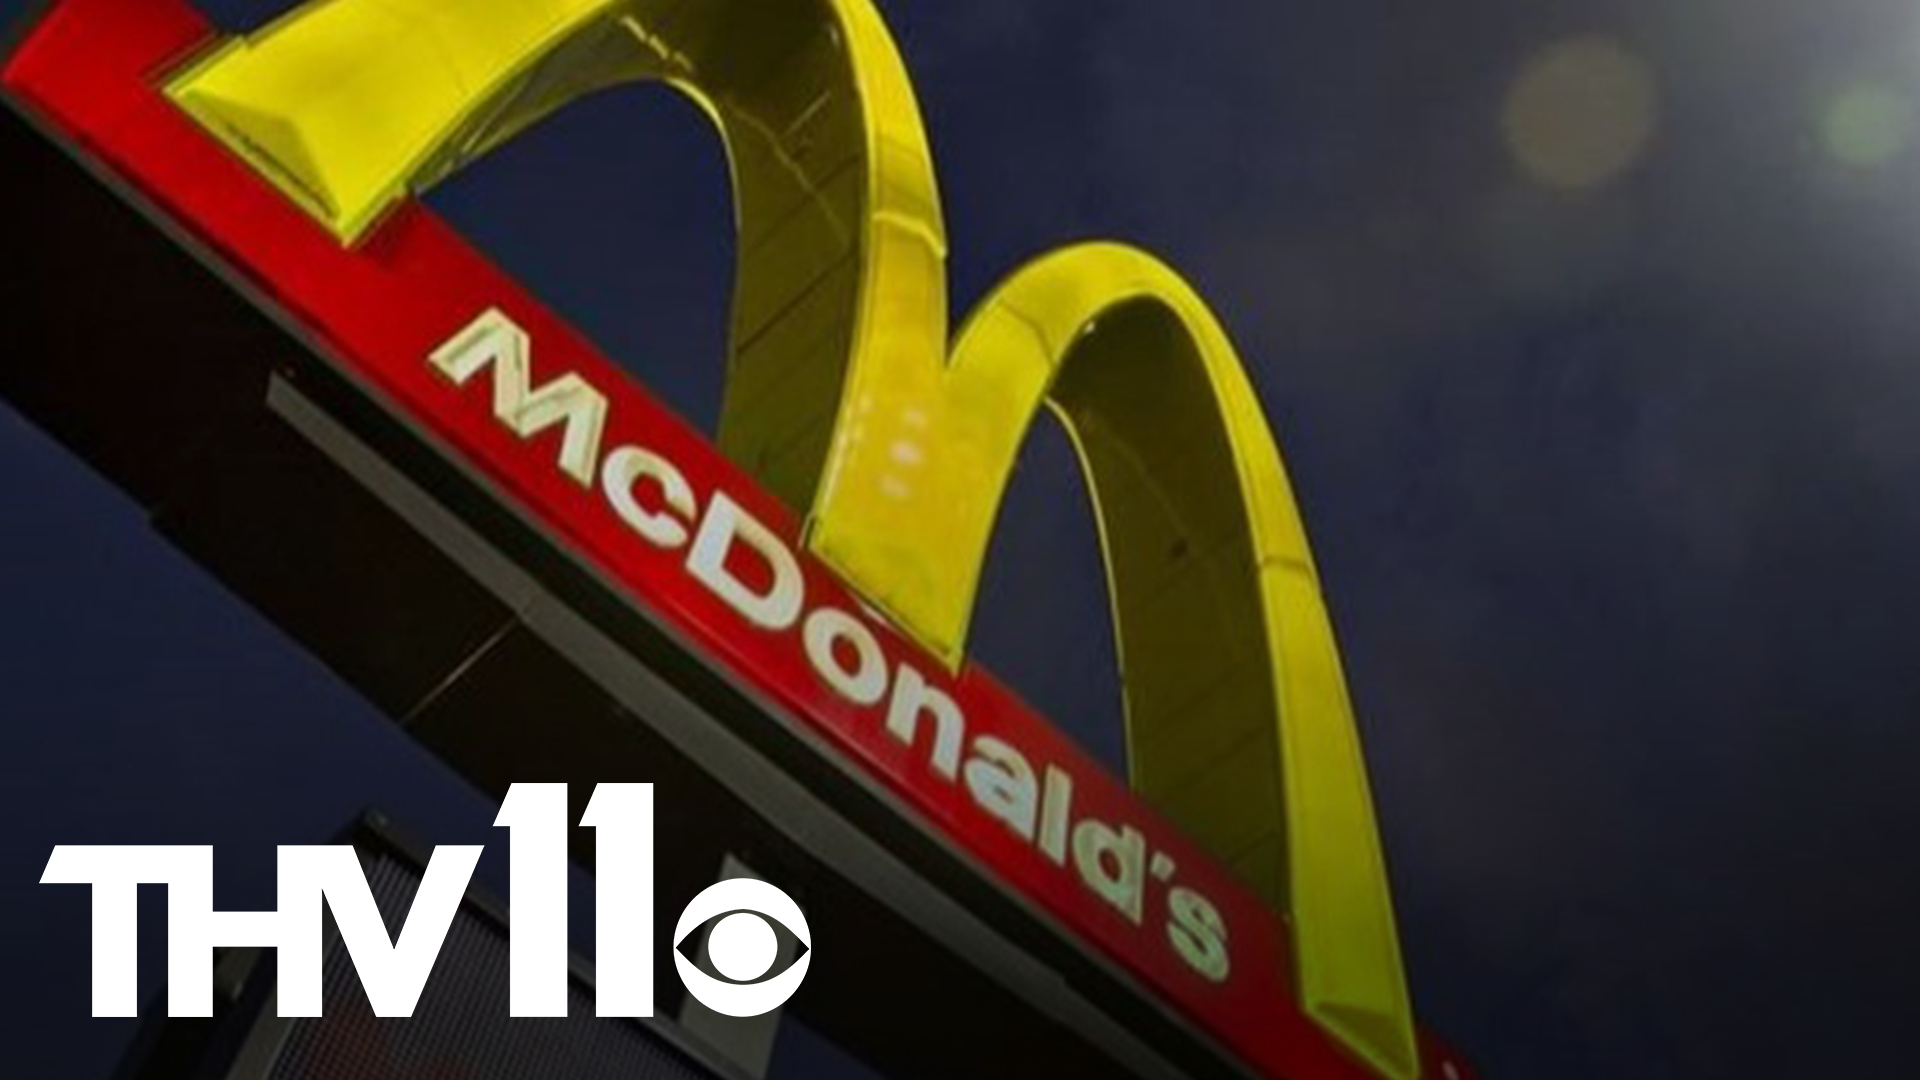 Police in Little Rock are trying to figure out exactly what led to a customer being shot by an employee at the McDonald's on Geyer Springs Road.